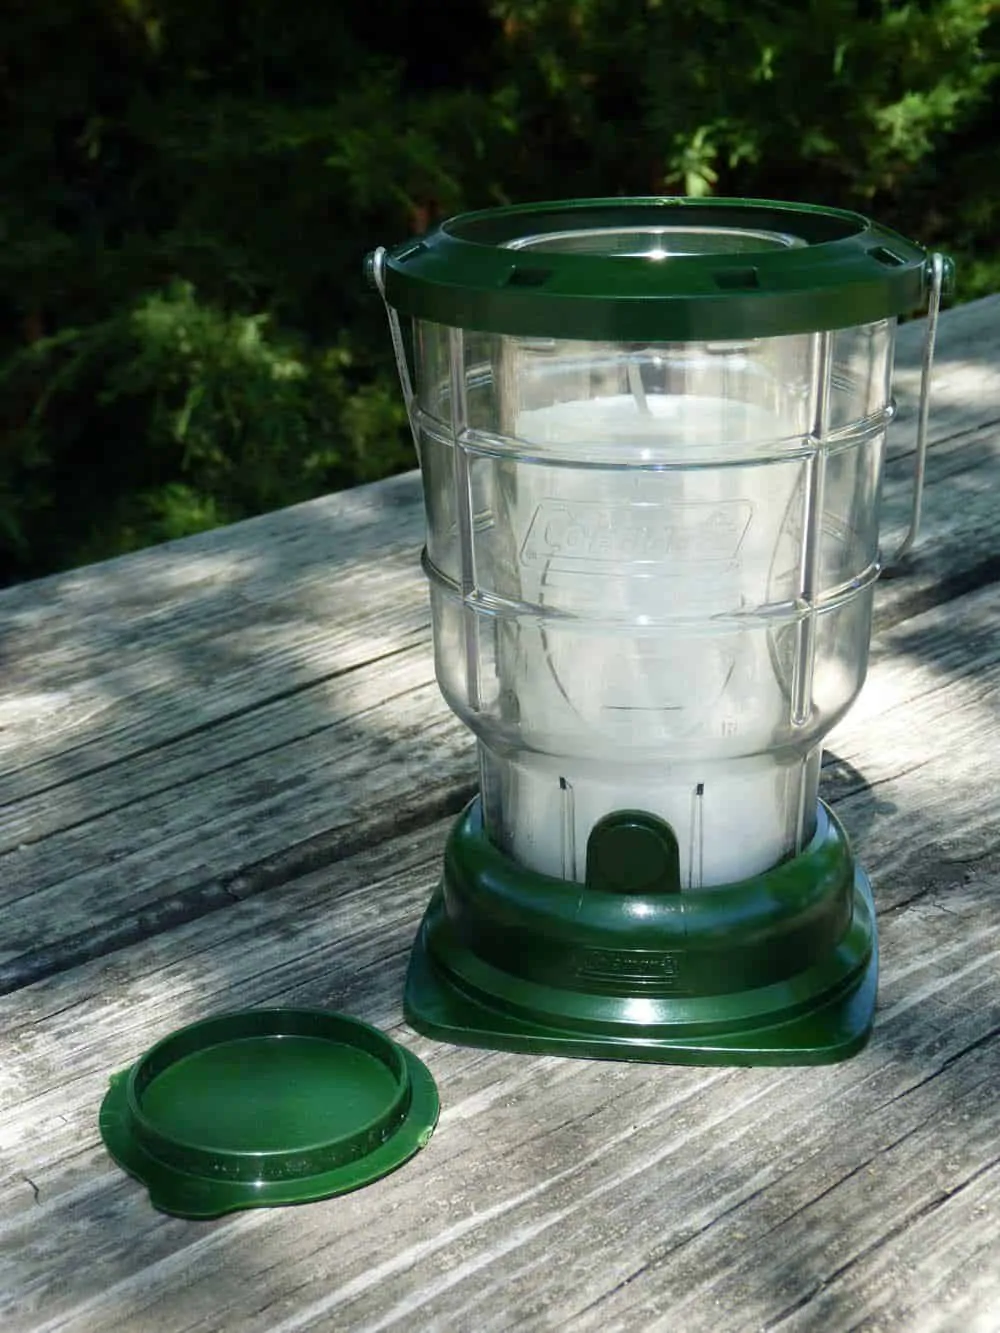 Coleman lantern sitting on a wooden picnic table